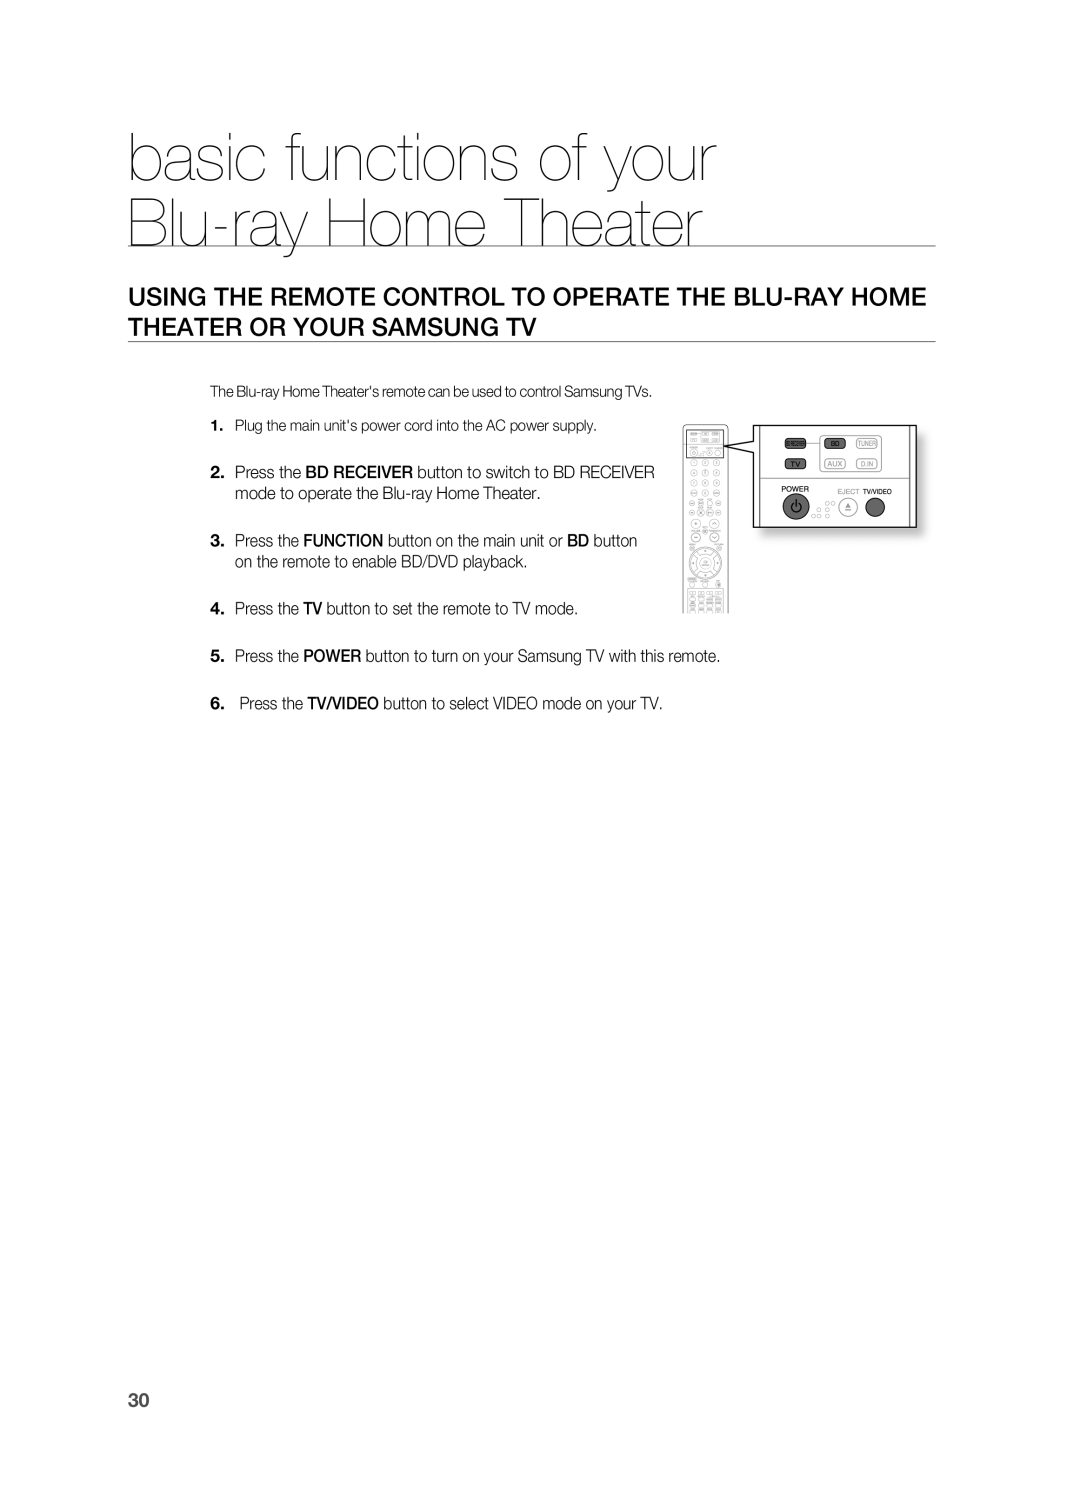 Samsung HT-BD2S manual basic functions of your Blu-rayHome Theater 